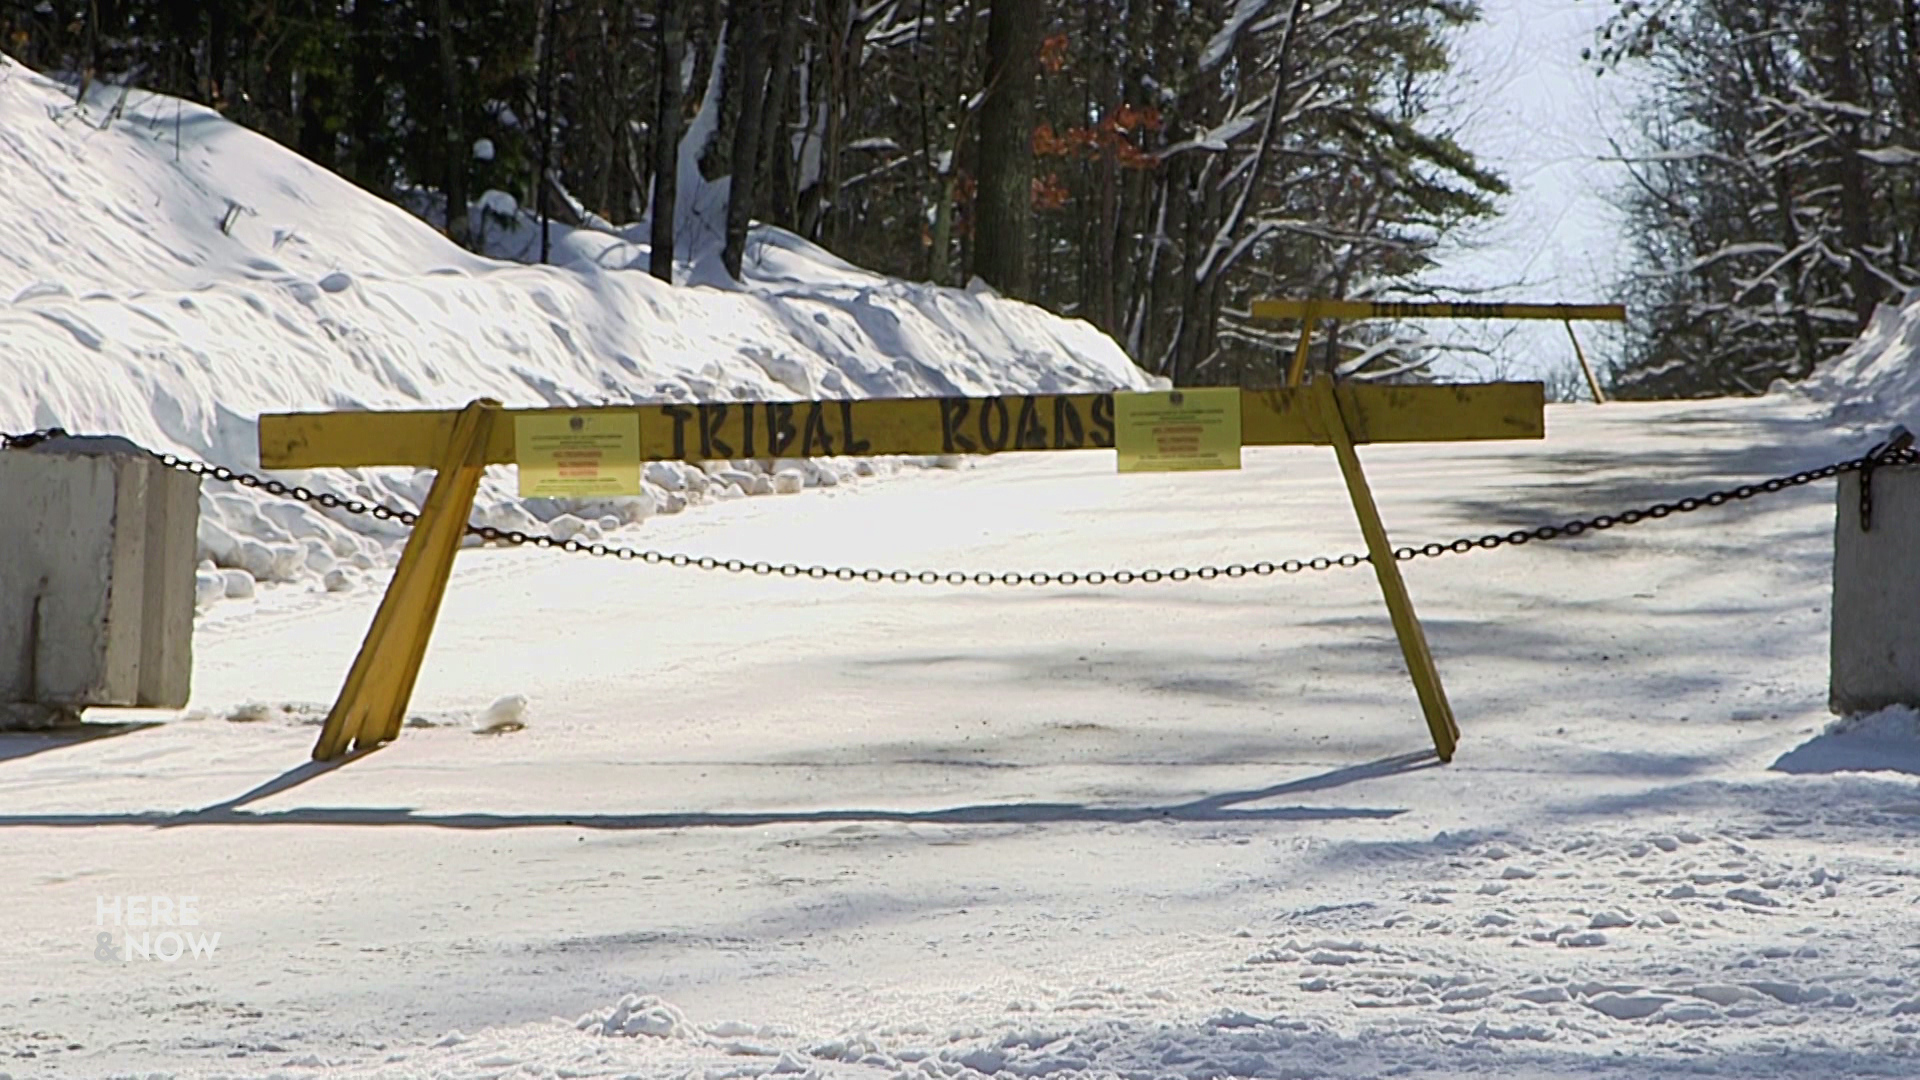 A wood road barrier with "tribal roads" painted on it and two concrete blocks connected with a metal chain sit in front of a road covered in snow, with trees in the background.